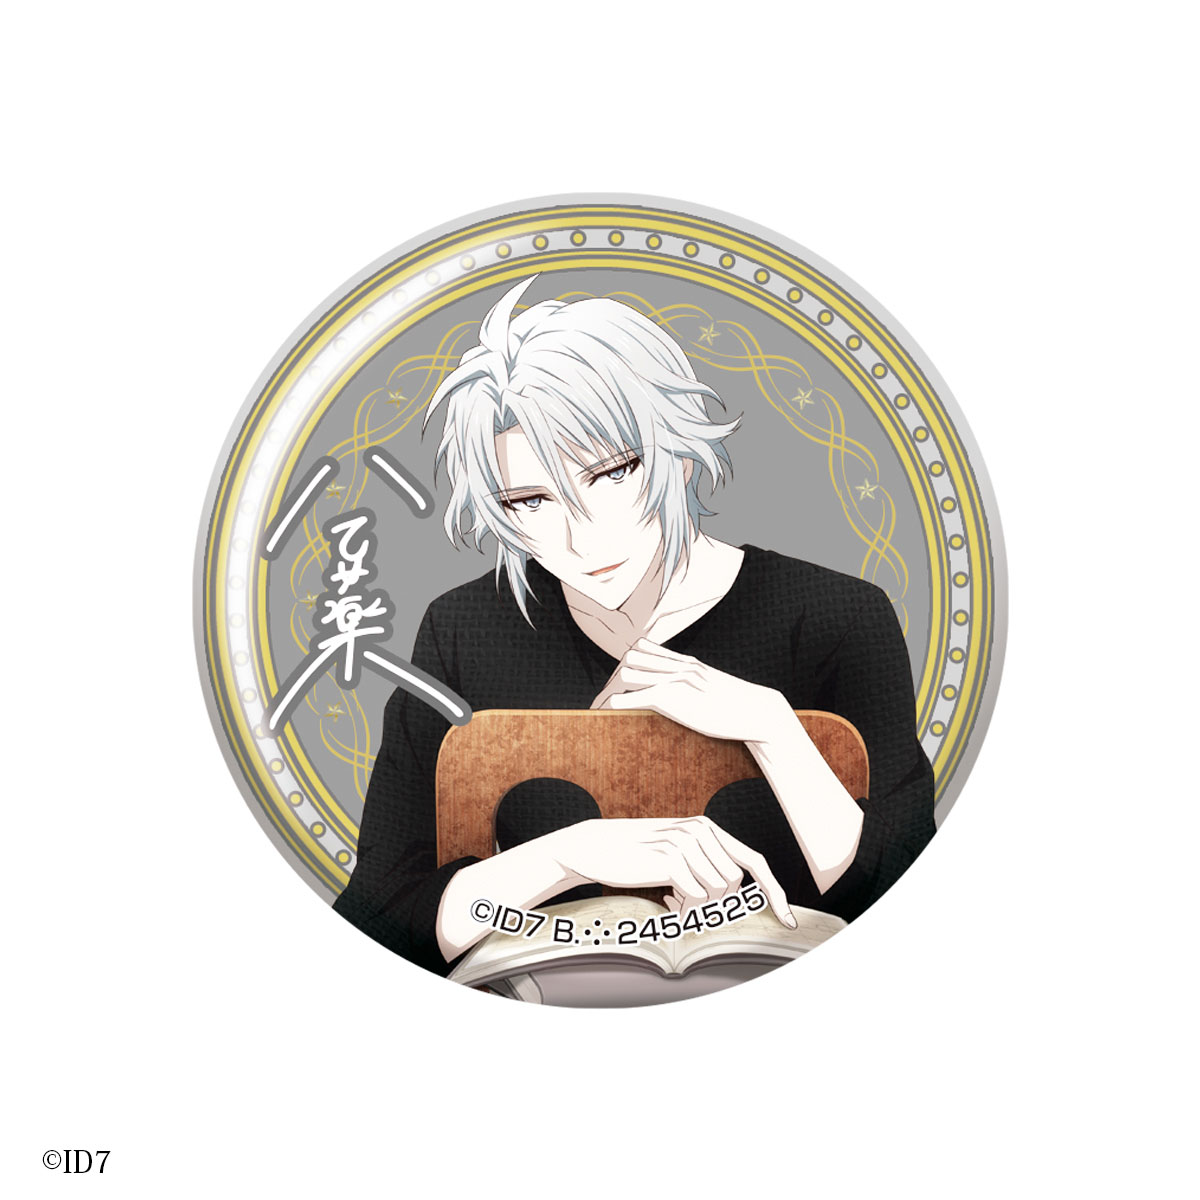 CAPSULE CAN BADGE ~ AGF2018 Re:vale & TRIGGER ver ~